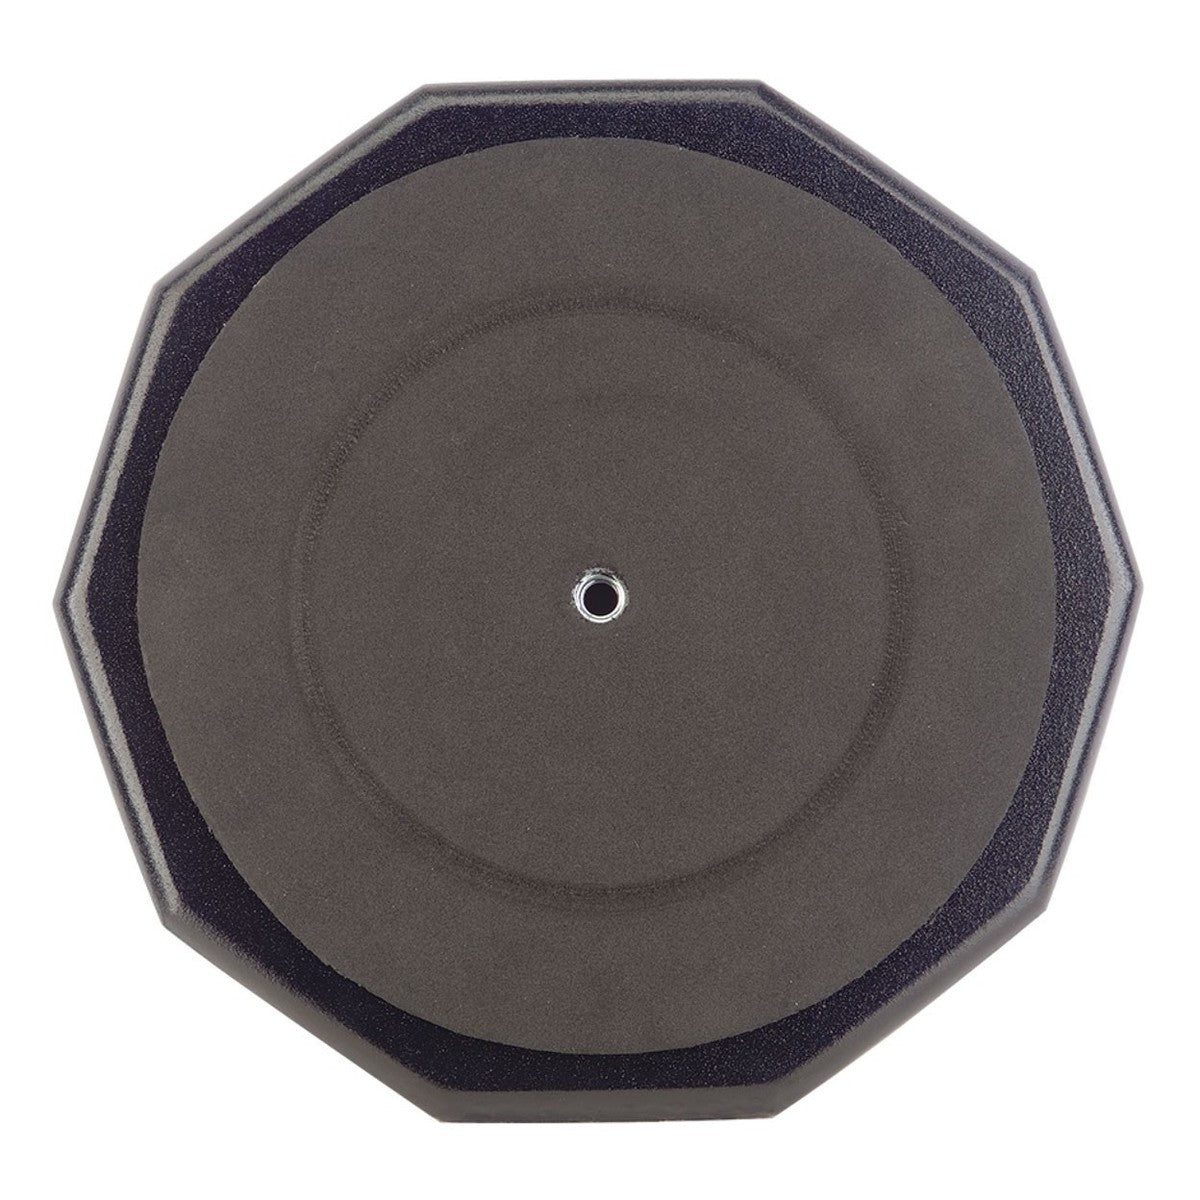 Stagg Practice Pad - TDR